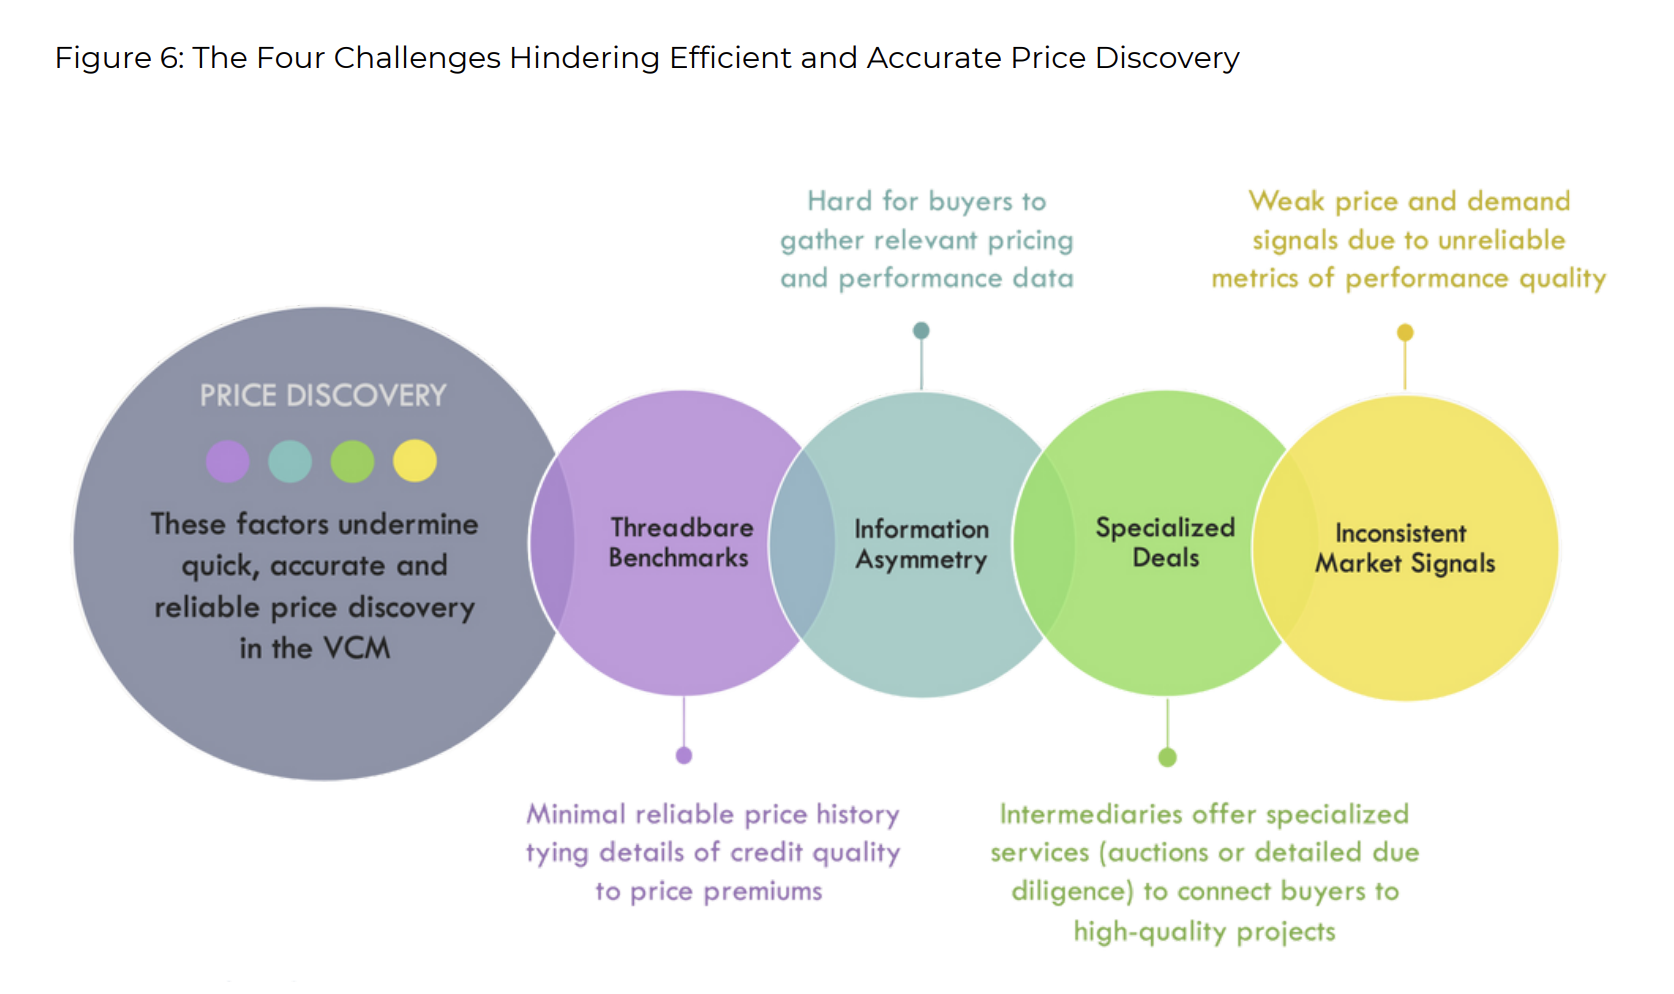 The four challenges that obstruct efficient and accurate price discovery in carbon markets, as highlighted by the Rocky Mountain Institute and Celo Climate Collective. The absence of a price history for carbon assets, as well as verifiable vintage and performance data, stunts its development. Source: Graphic (https://static1.squarespace.com/static/6155af7da5675116403c9136/t/64c2ccf643835343d7d96e9d/1690488068349/VCM+Landscape+Guide.pdf?ref=blog.toucan.earth) by the Rocky Mountain Institute & Climate Collective, used under a fair use rationale.